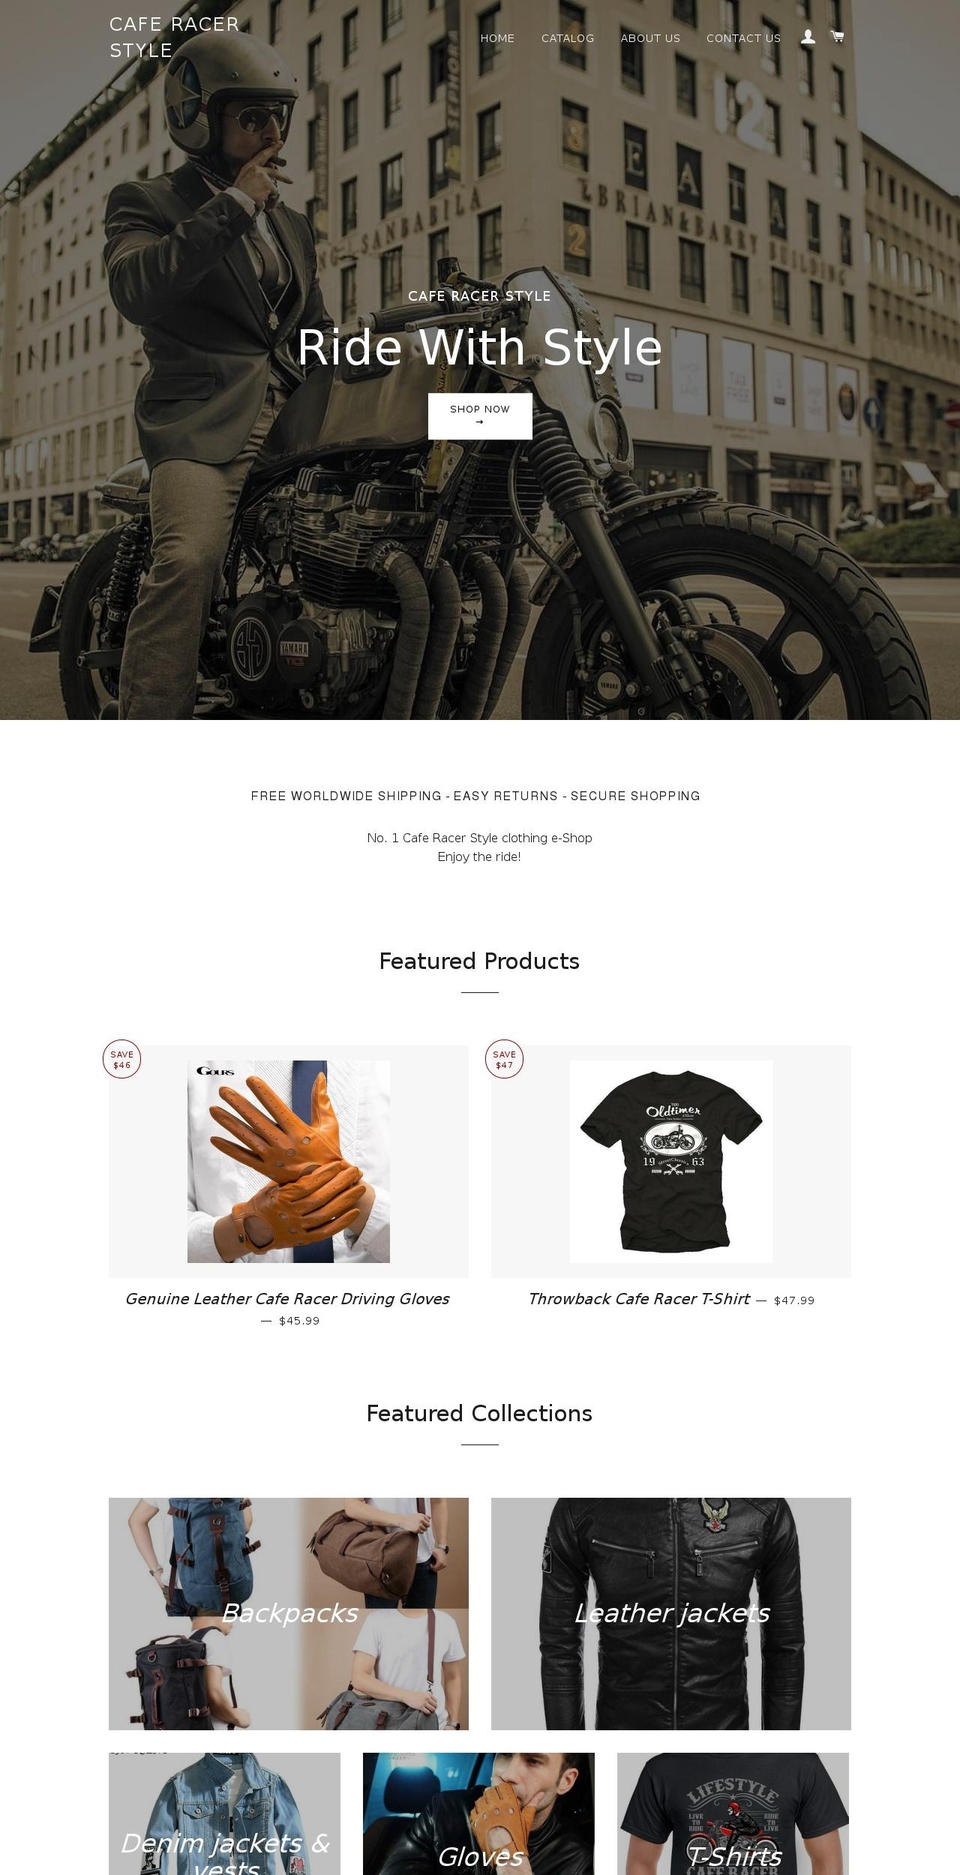 caferacer.style shopify website screenshot